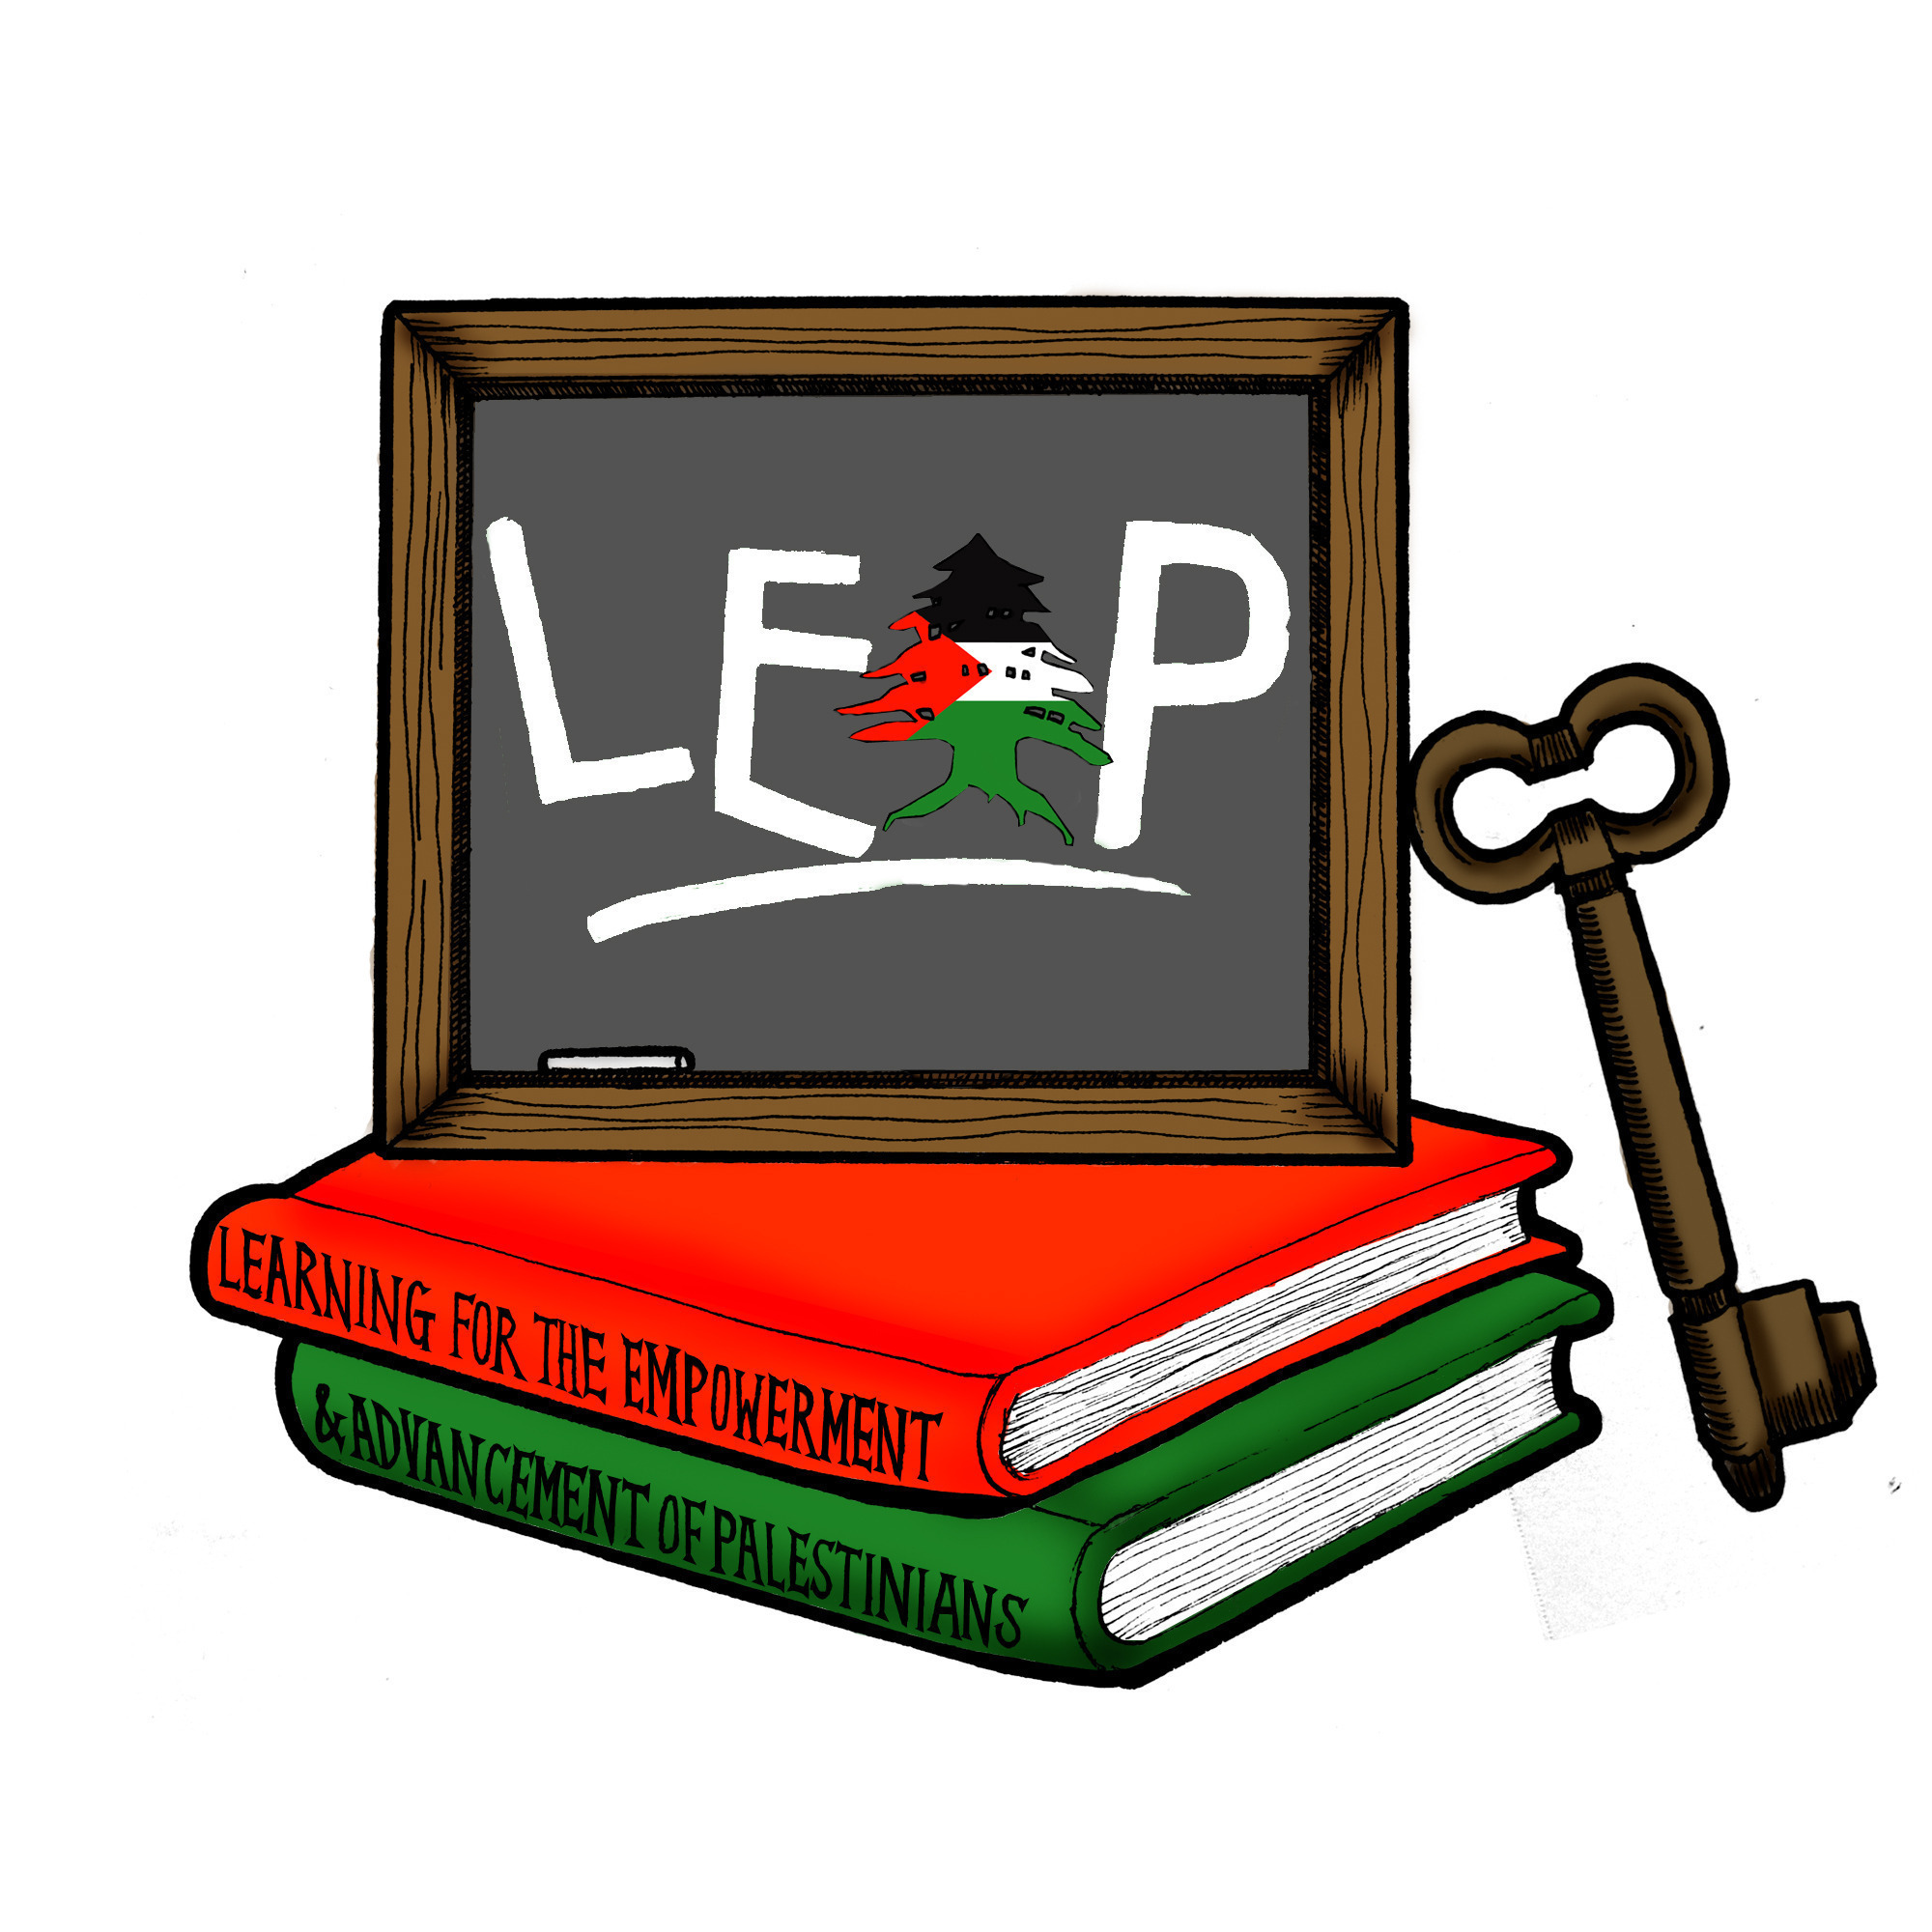 LEAP Program Donate to our organisation